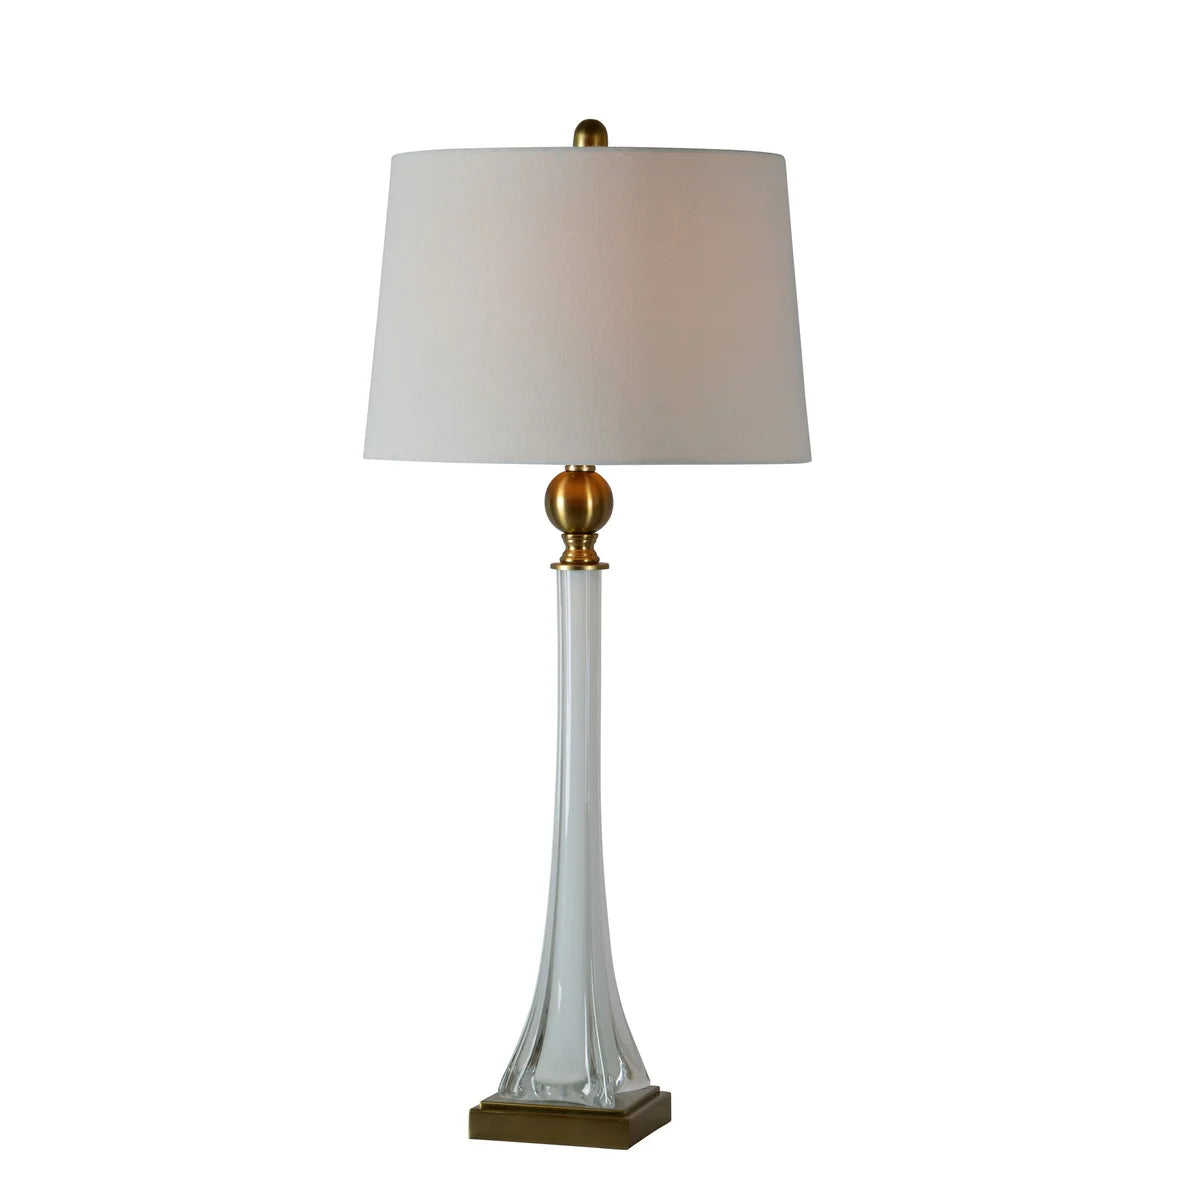 Forty West Designs 73057 Jaqueline Tapered Glass Table Lamp